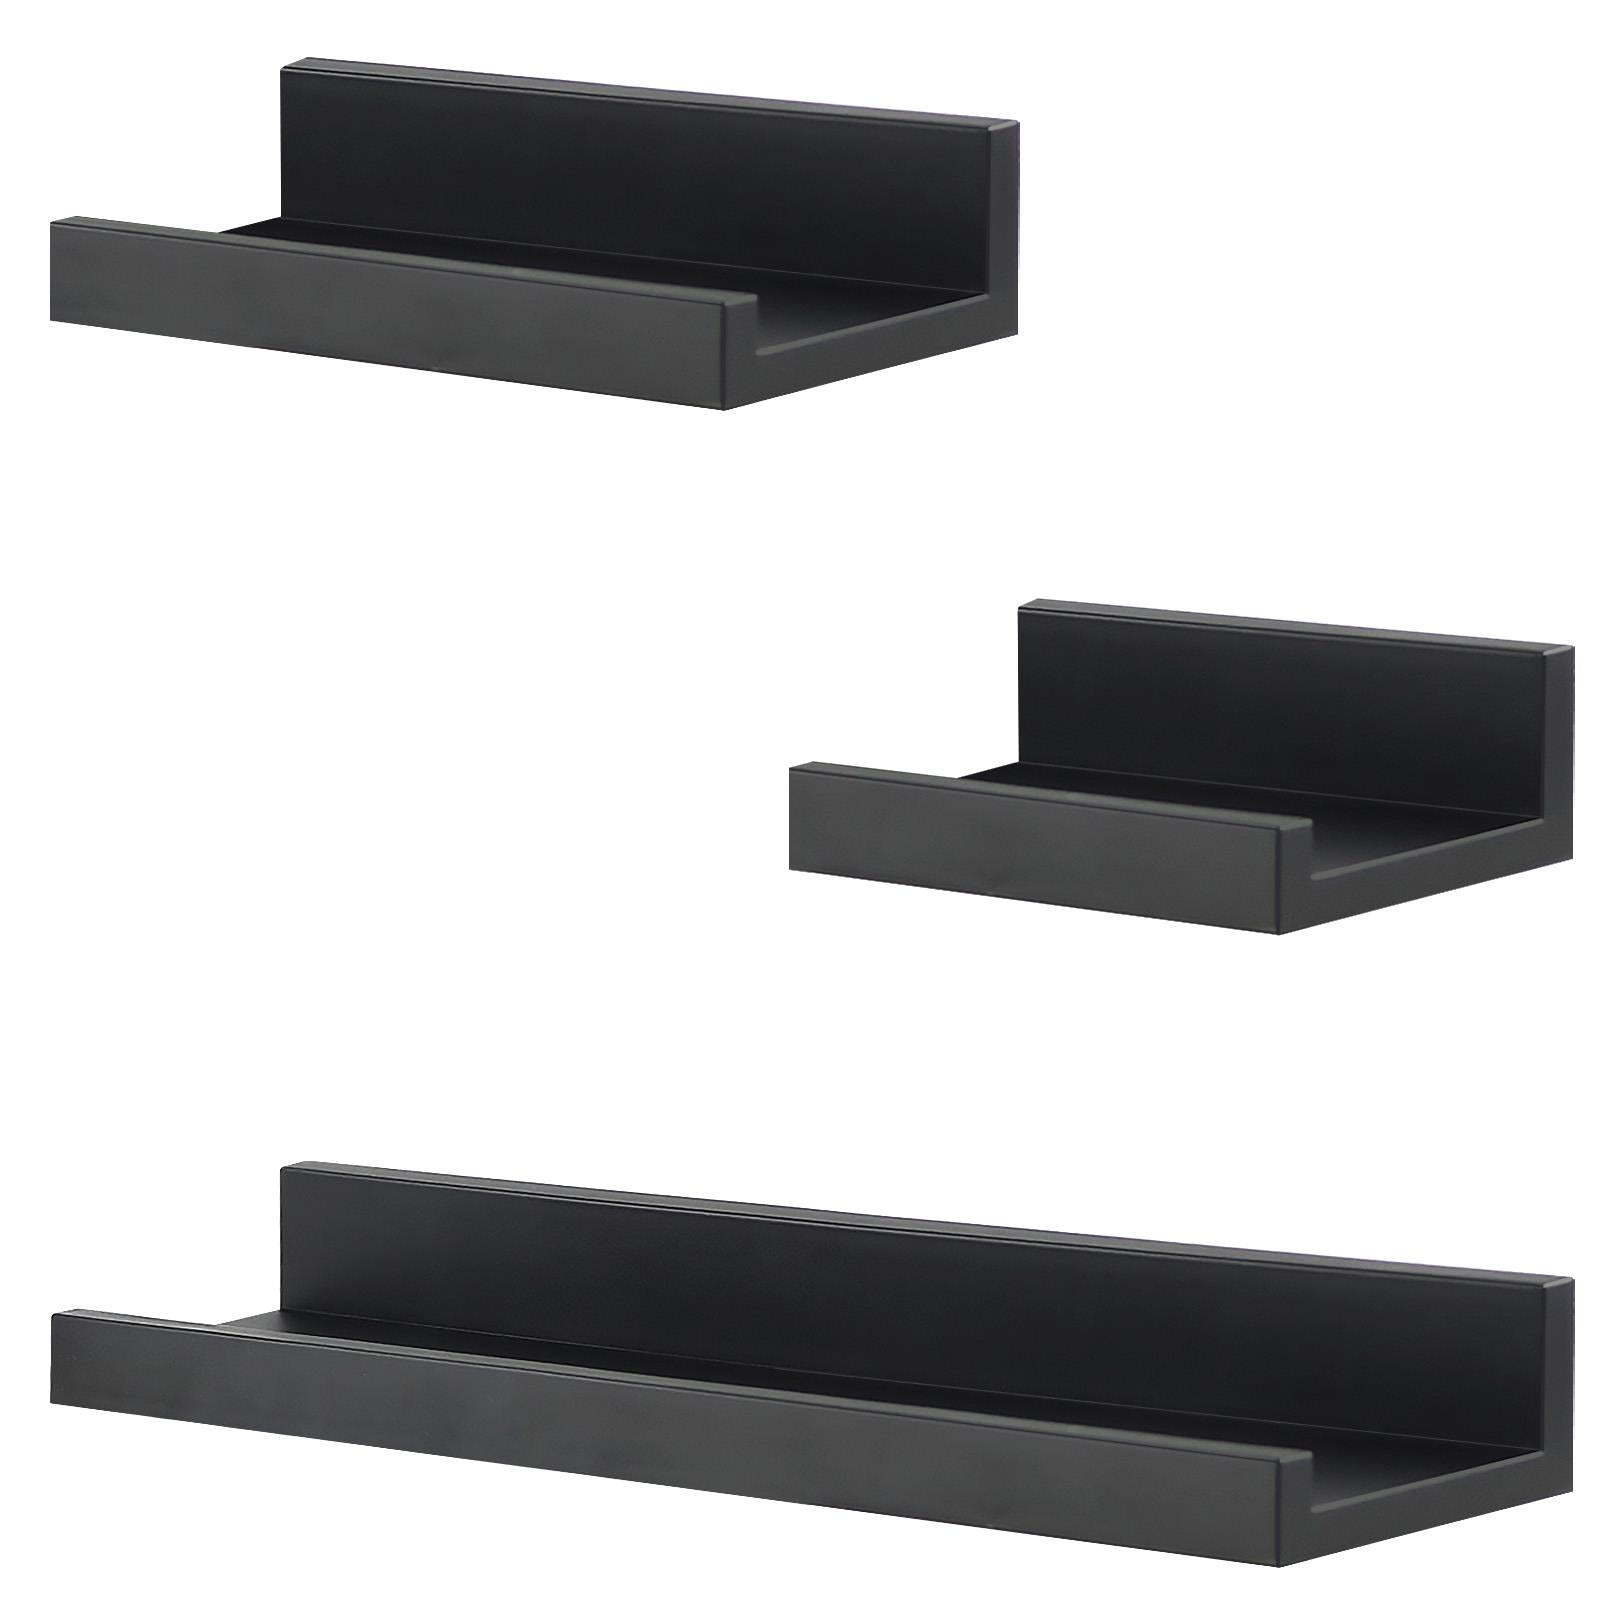 Wall Book Hanging Black Shelf Set of 3 by GEEZY - The Magic Toy Shop